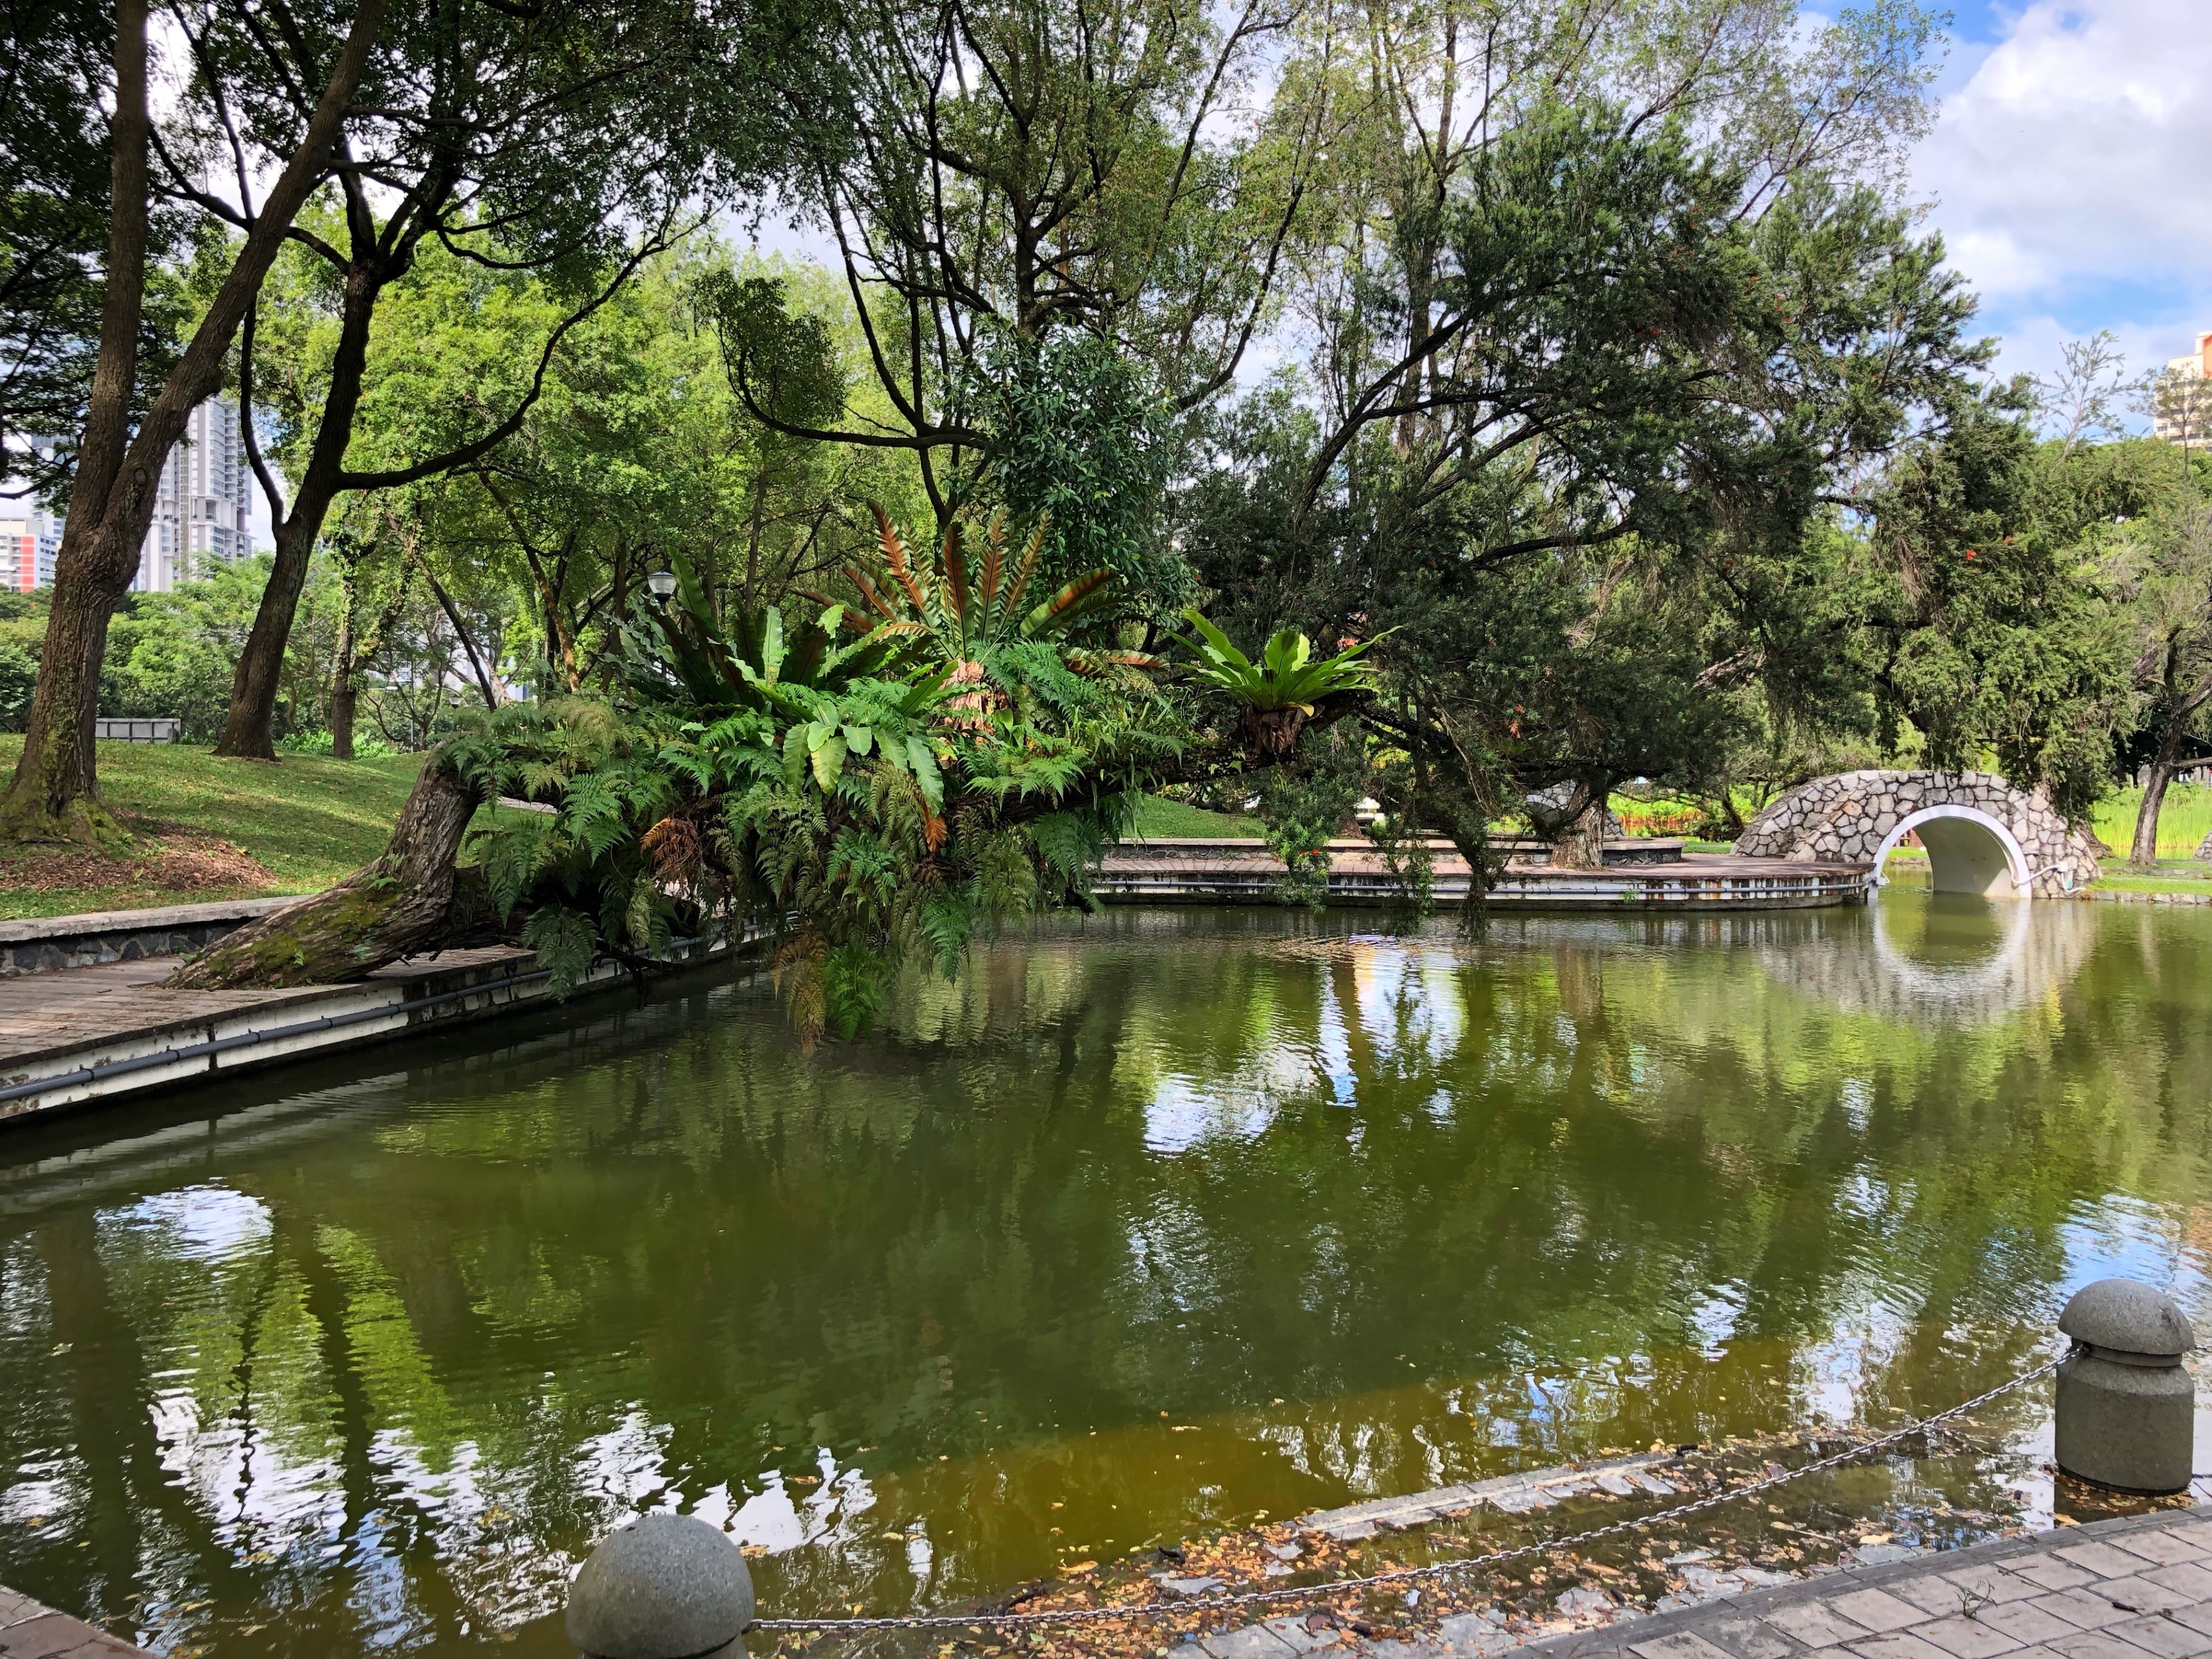 Completed in 1973, it is a great place for a walk. It has tortoises and fish in the pond. (January 2019)

#Trovember